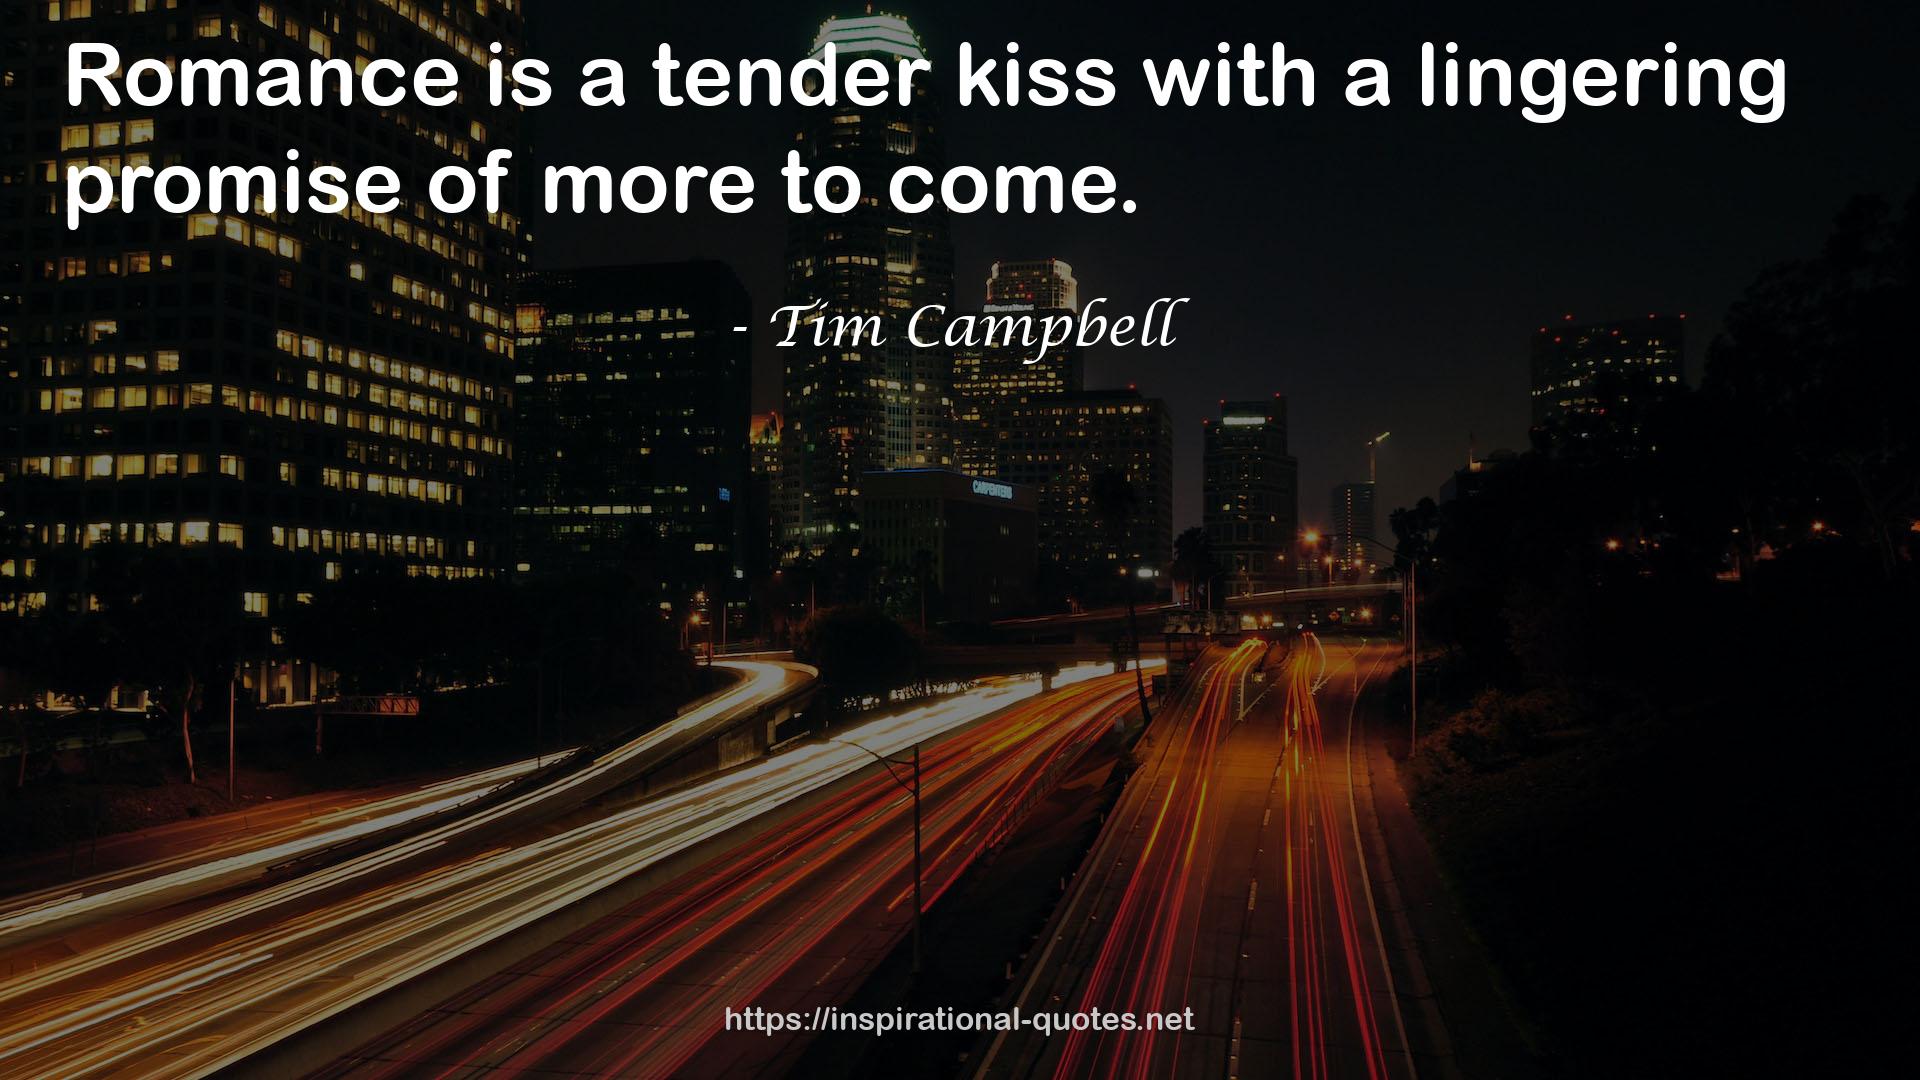 Tim Campbell QUOTES